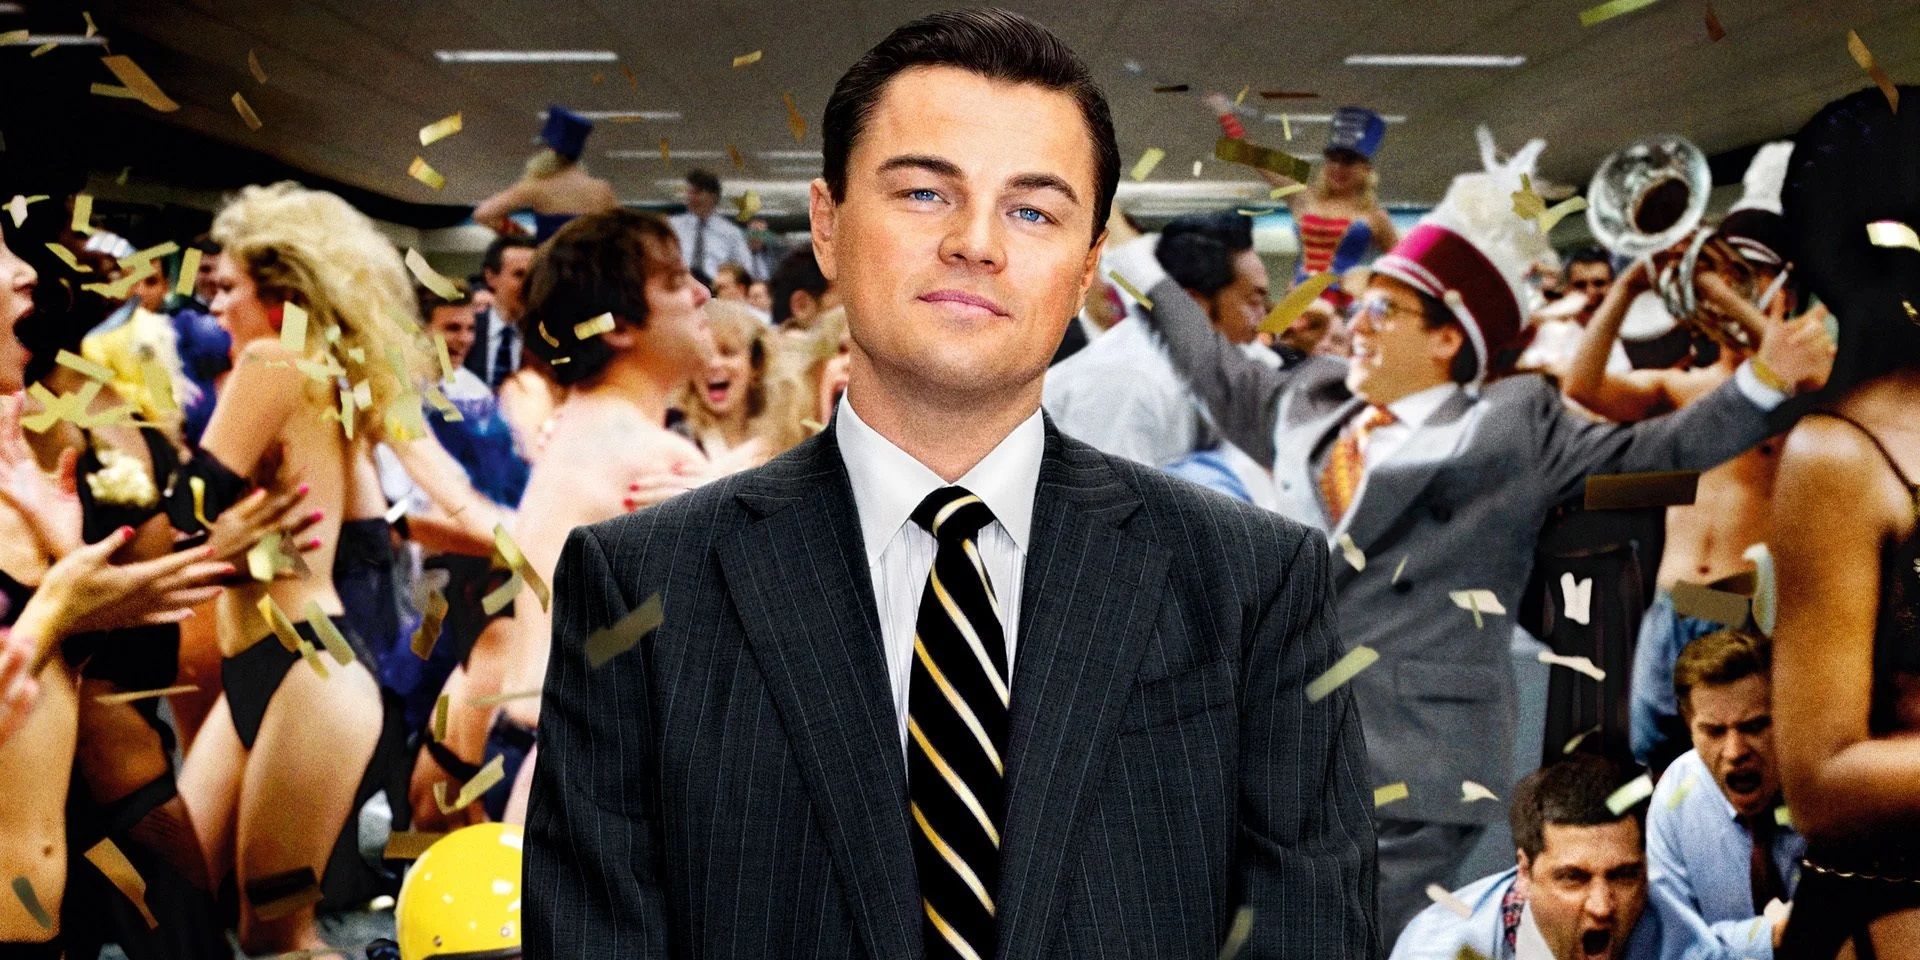 Leonardo DiCaprio on the poster for The Wolf of Wall Street